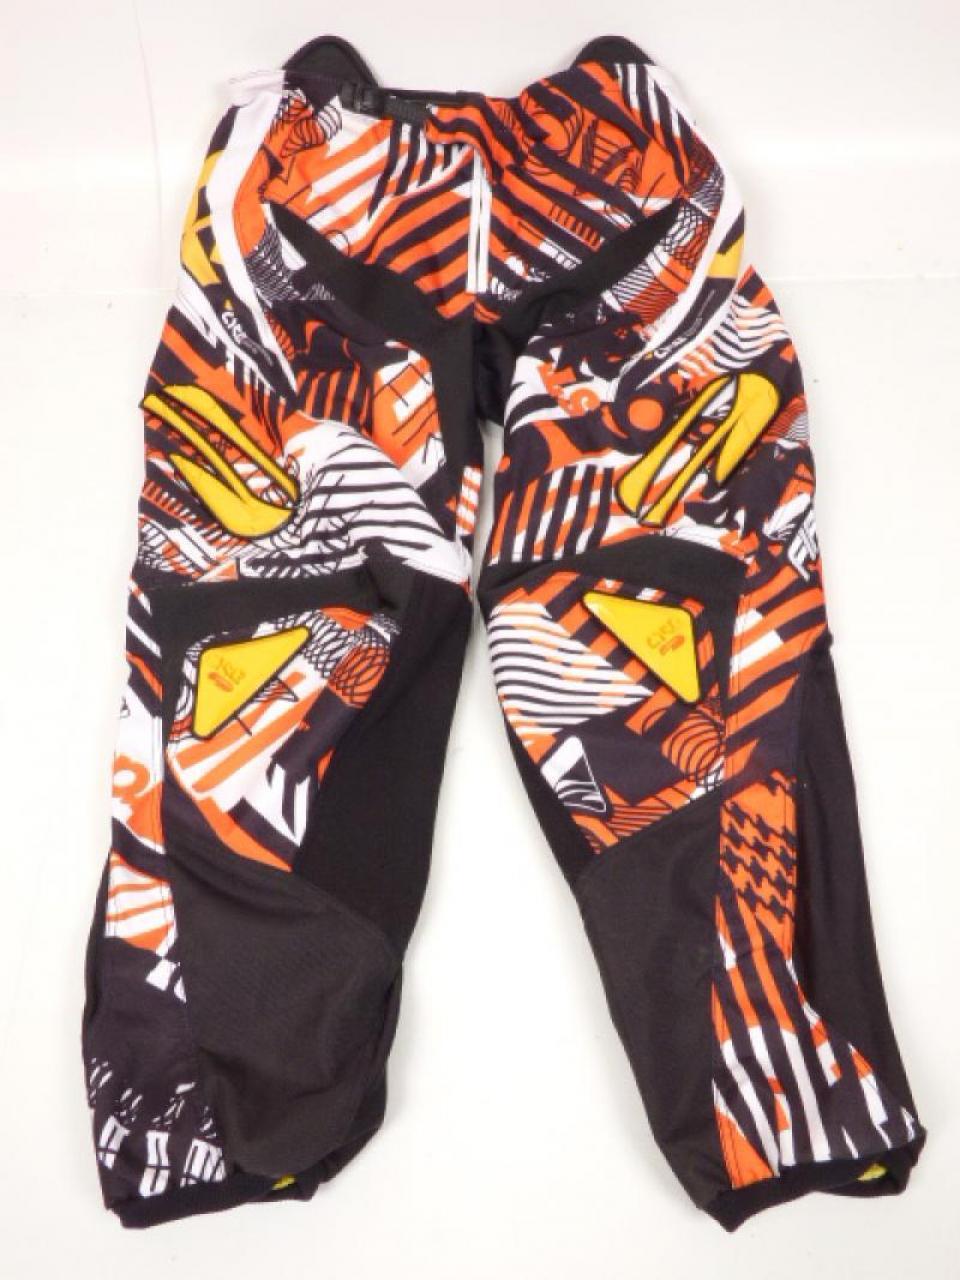 Pantalon pour moto cross First Homme / Femme First Taille 50 Neuf